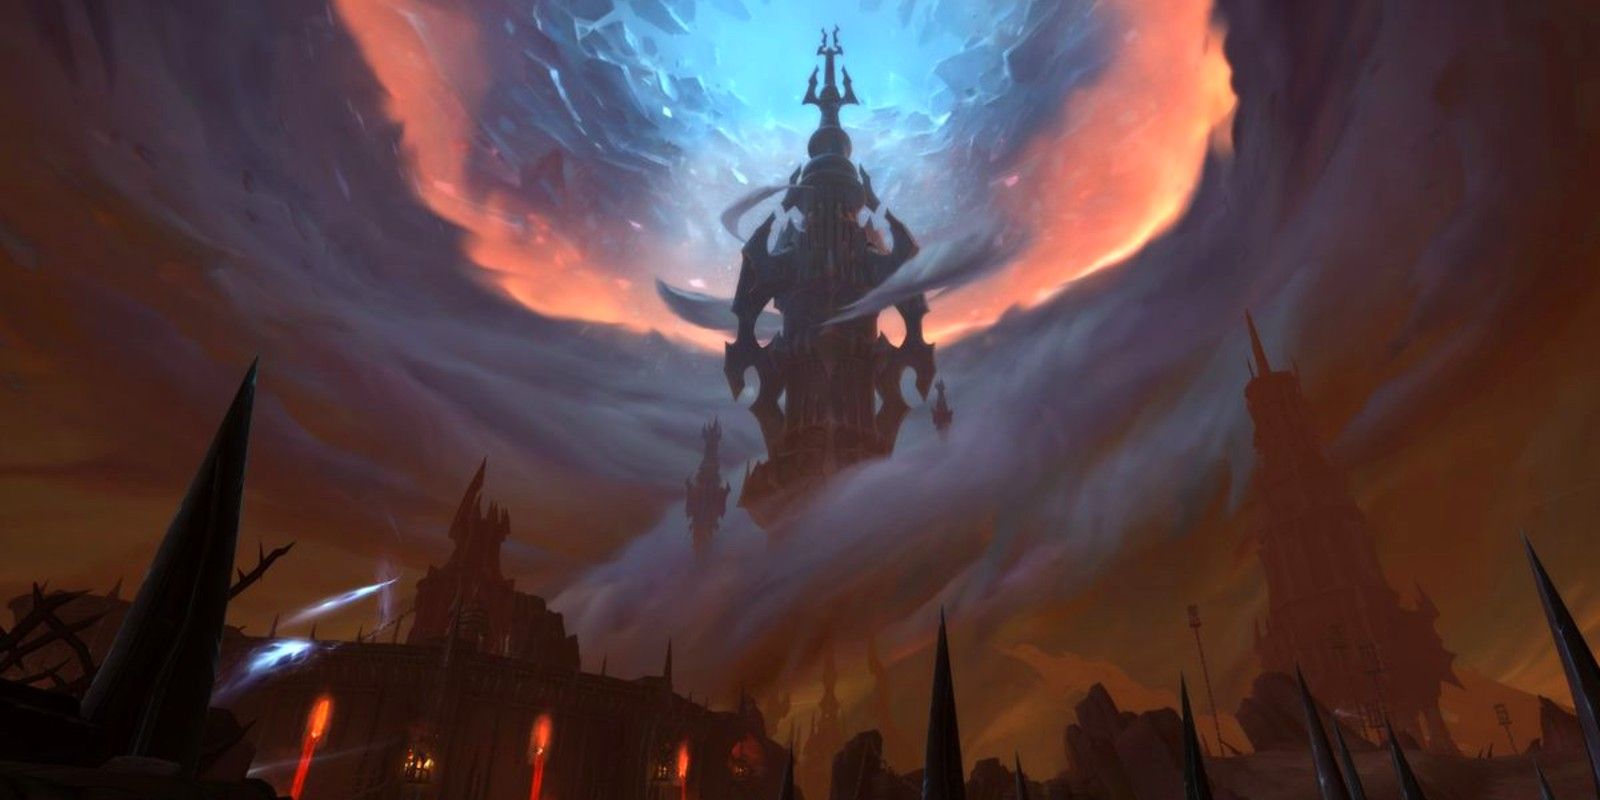 Players need to rescue Lost Souls from the Tower in The Maw in World of Warcraft: Shadowlands